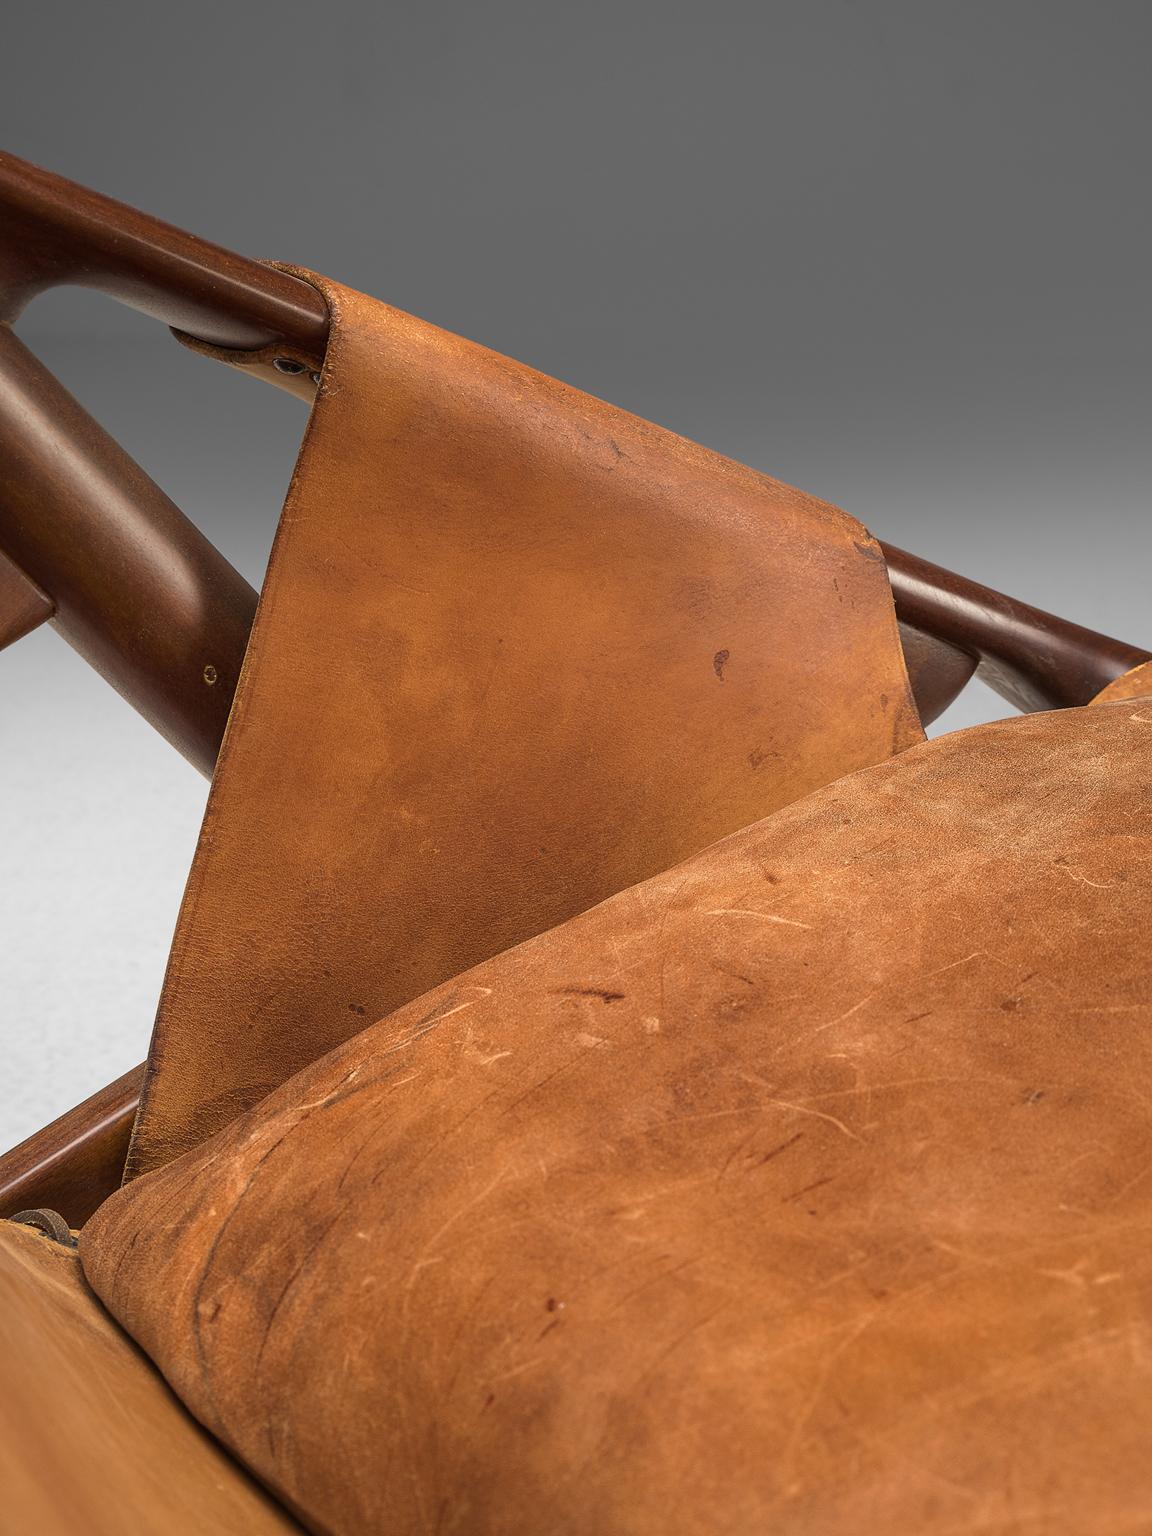 Andersag Lounge Chair in Patinated Cognac Leather 3